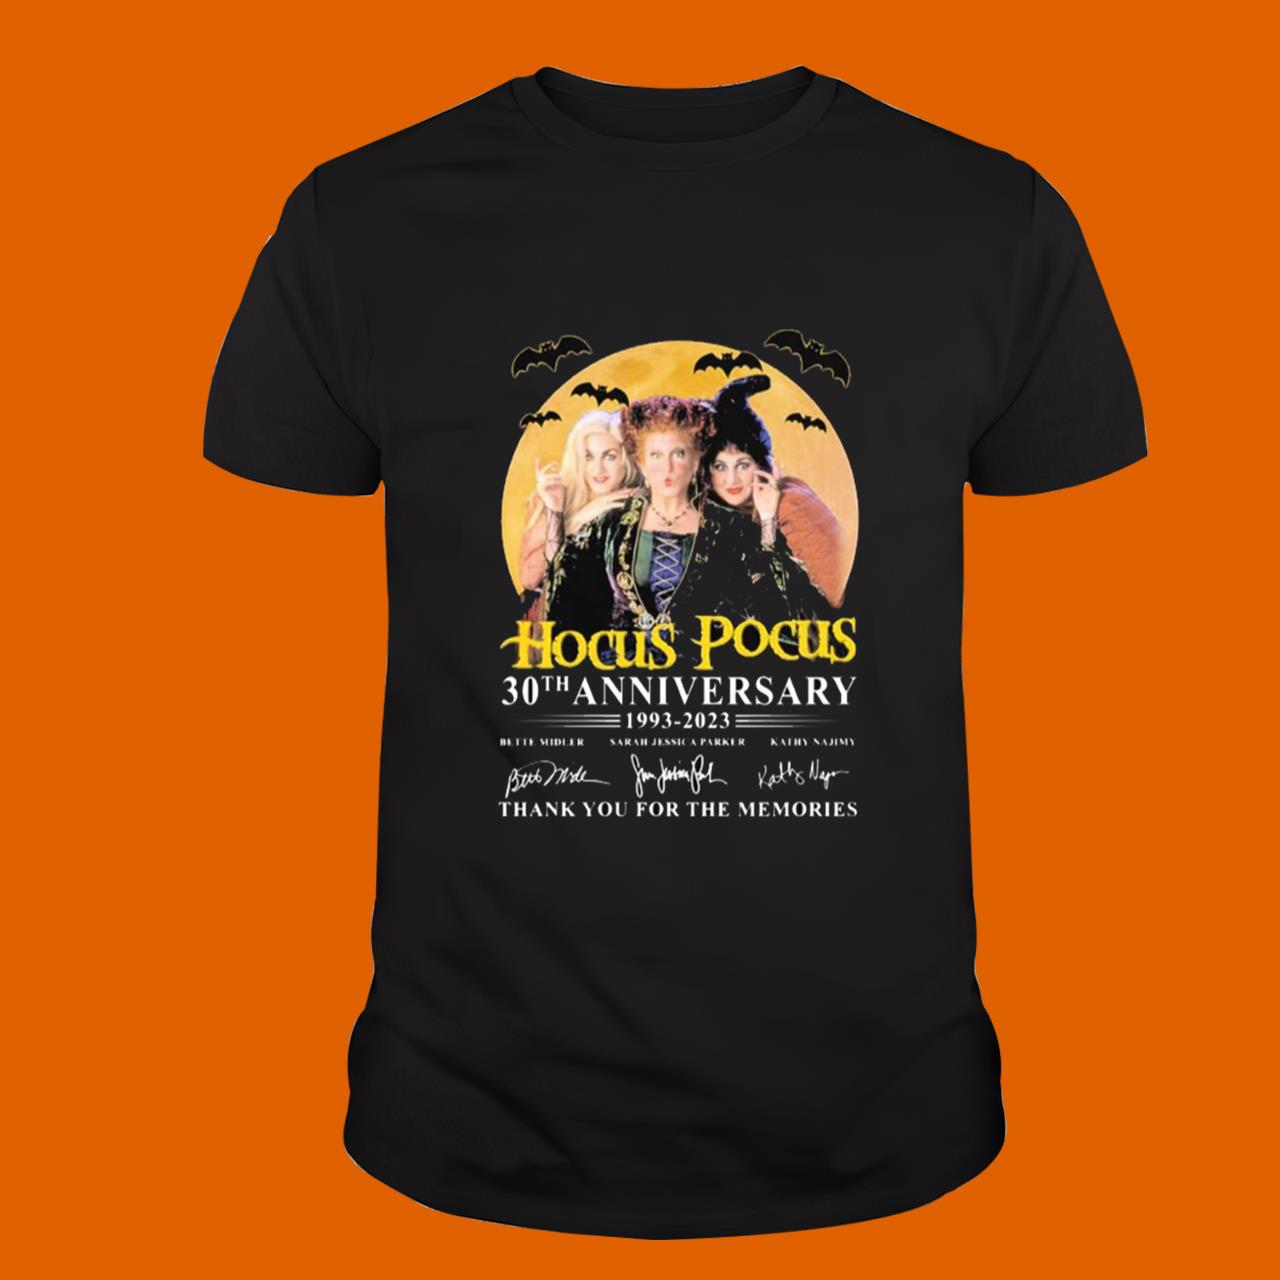 Hocus Pocus 30th Anniversary 1993 2023 Signatures Thank You For The Memories T-Shirt